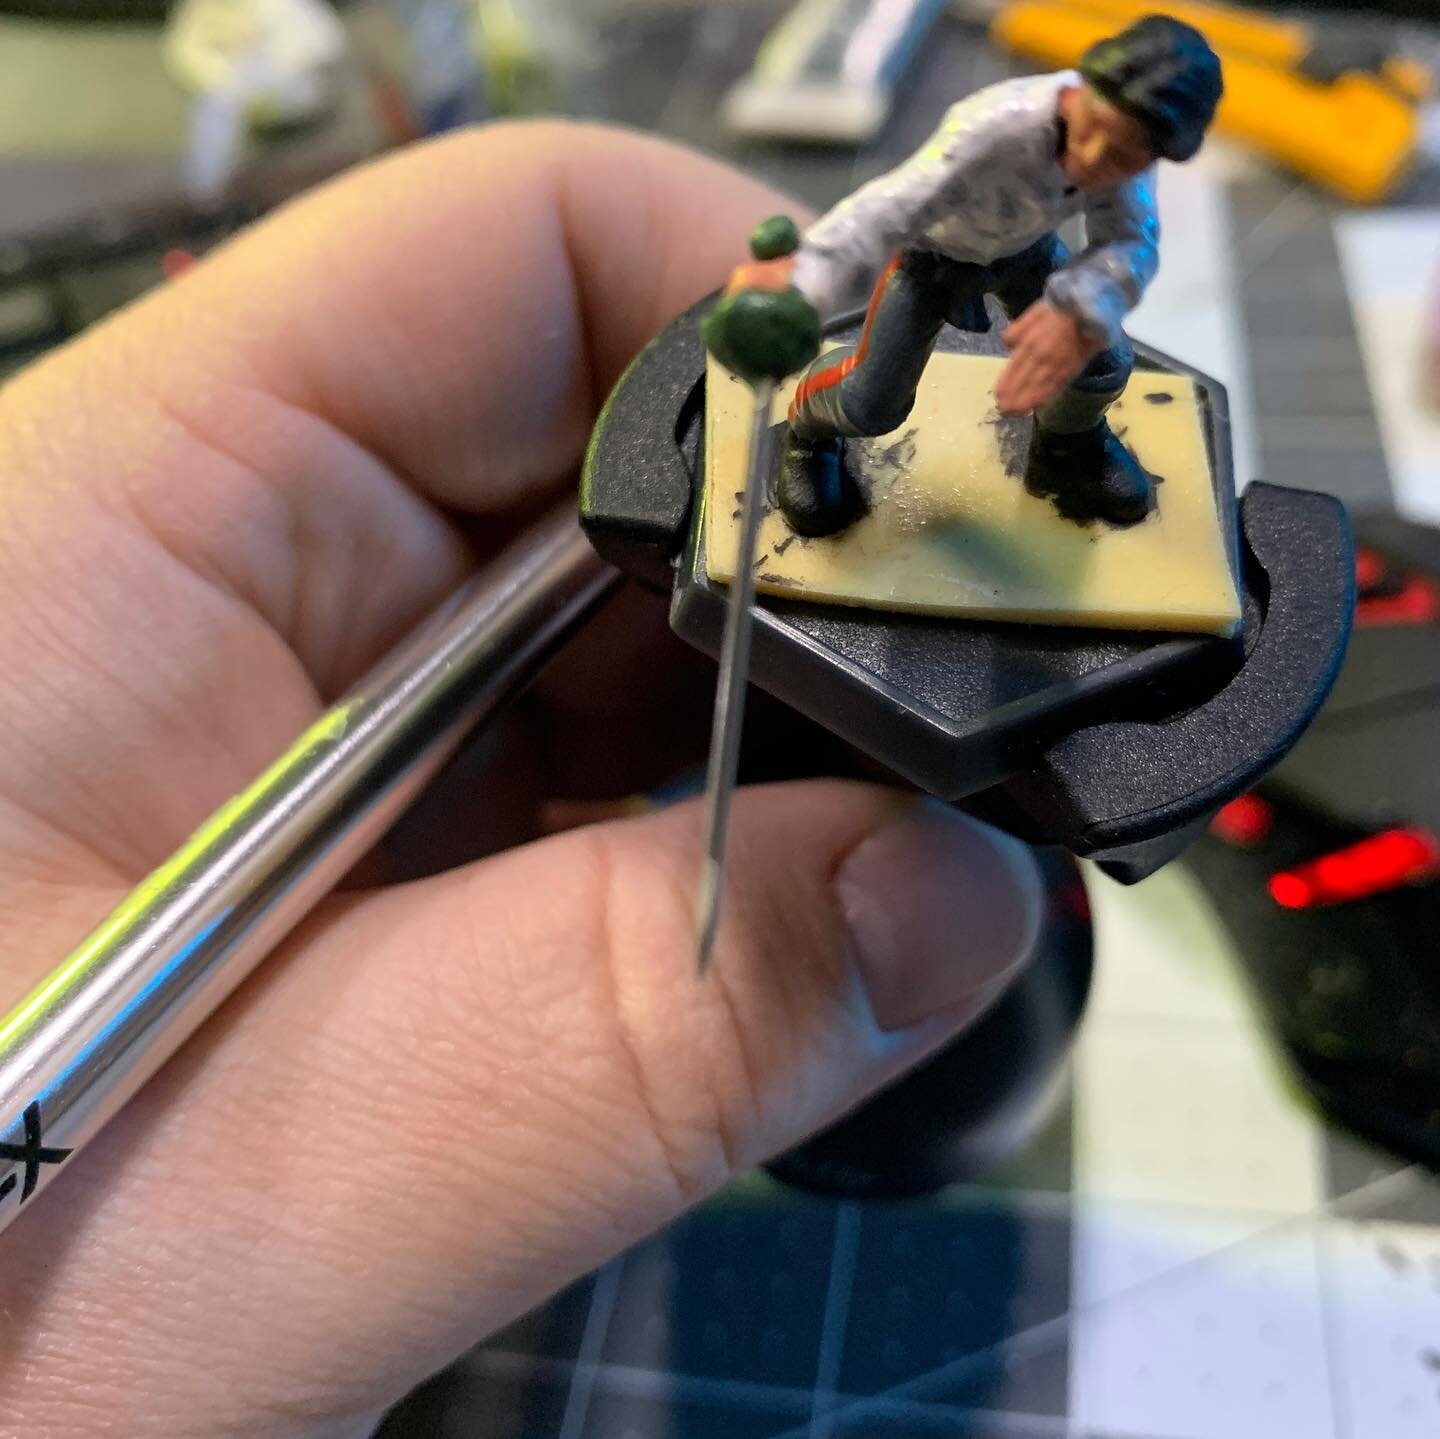 Teeny tiny swords added to my minis, this diorama of Ridley Scotts first movie, The Duelists has been a blast to work on. :) #tabletopterrain #DND #tabletopgames #tabletopgaming #rpg #tabletoprpg #buildingminis #diorama #dioramacreators #craft #table